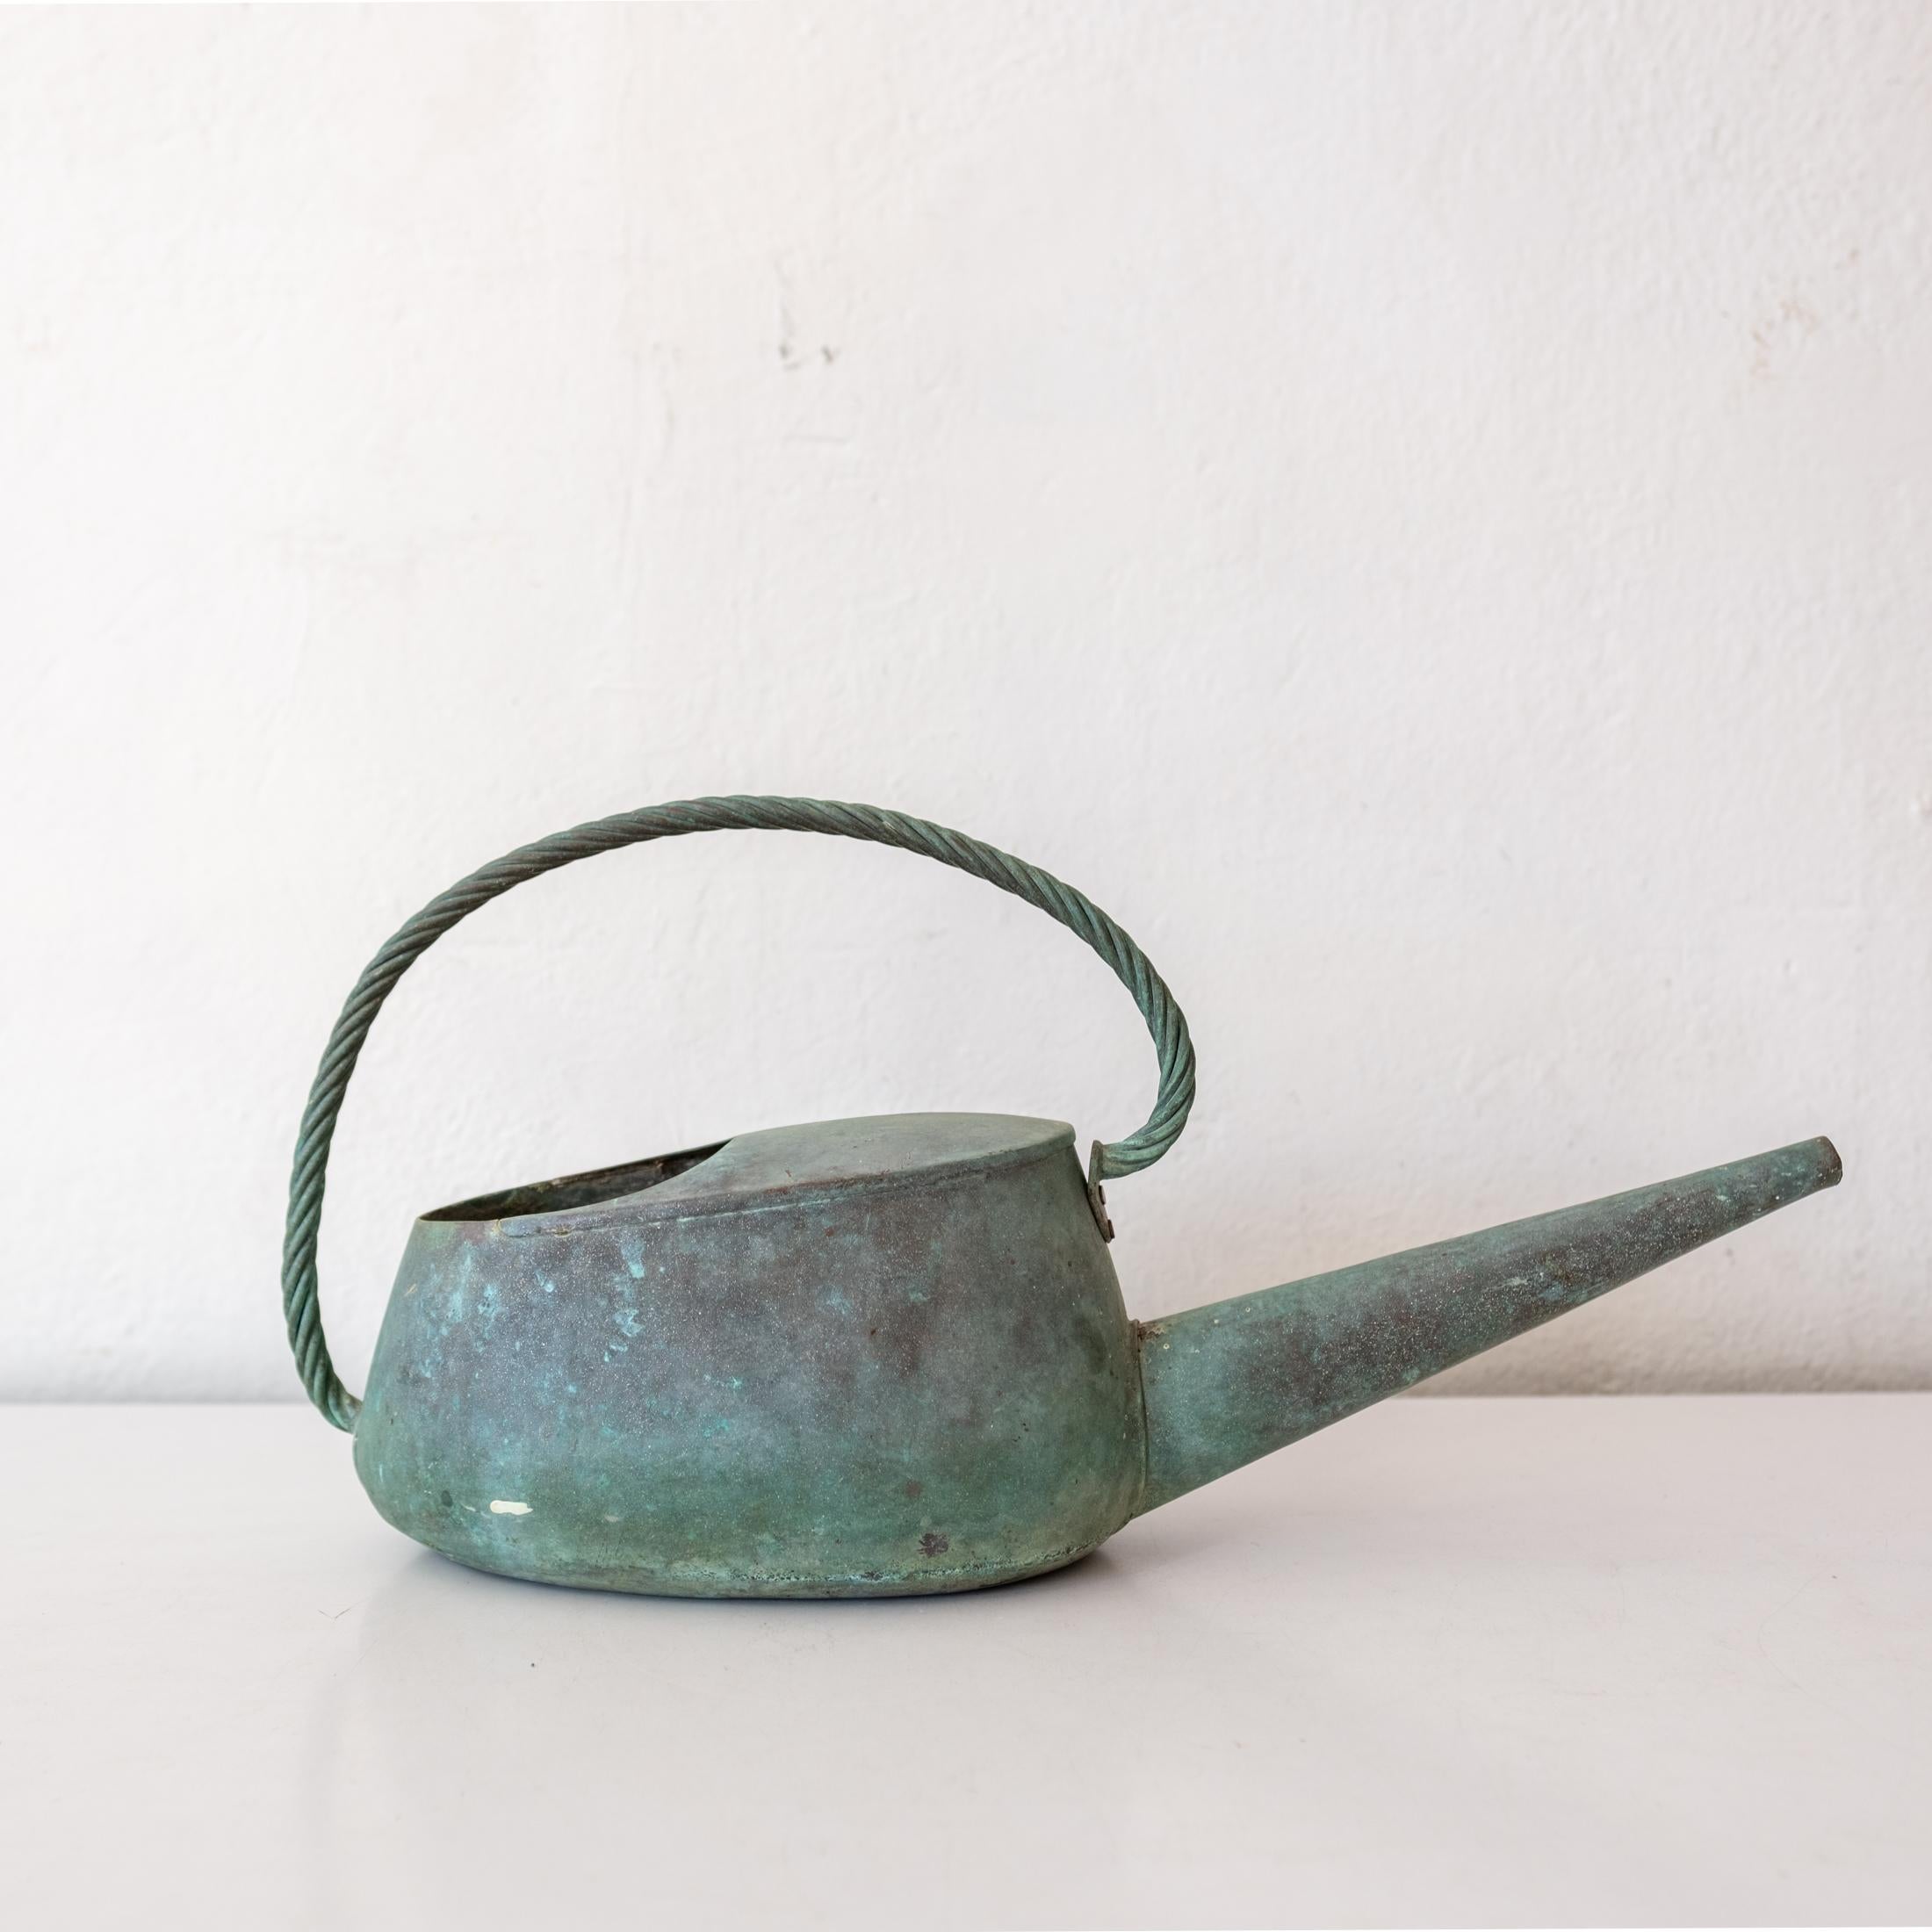 A high quality thick solid brass watering can. A functional aesthetic with a beautiful patina. Signed on the bottom. Watertight and pours nicely.